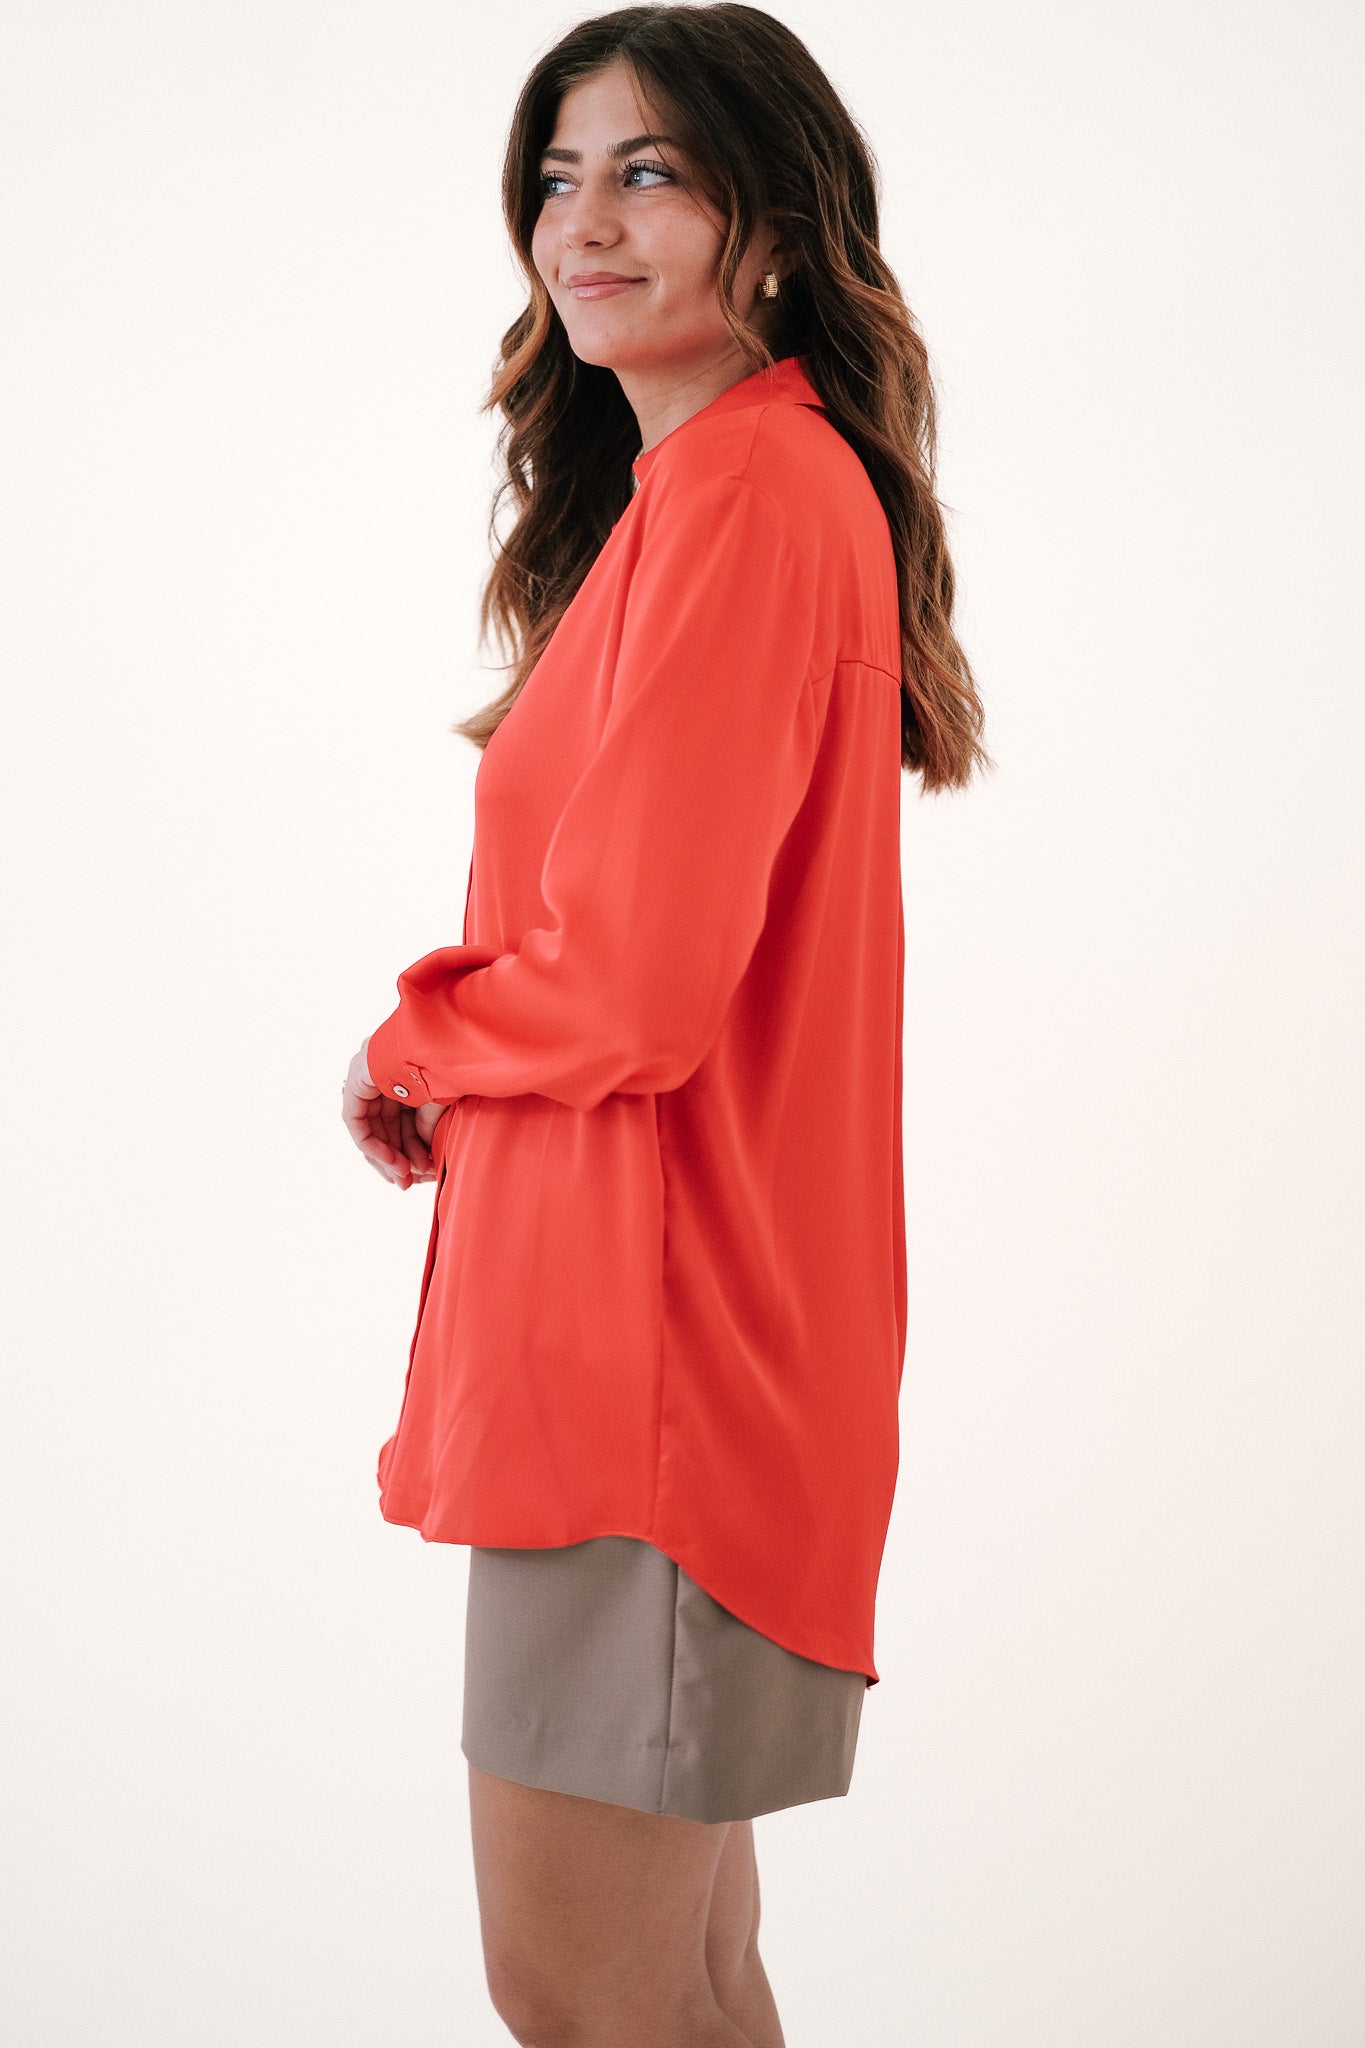 Lucy Paris Elena Red Satin Buttoned Top (XS)